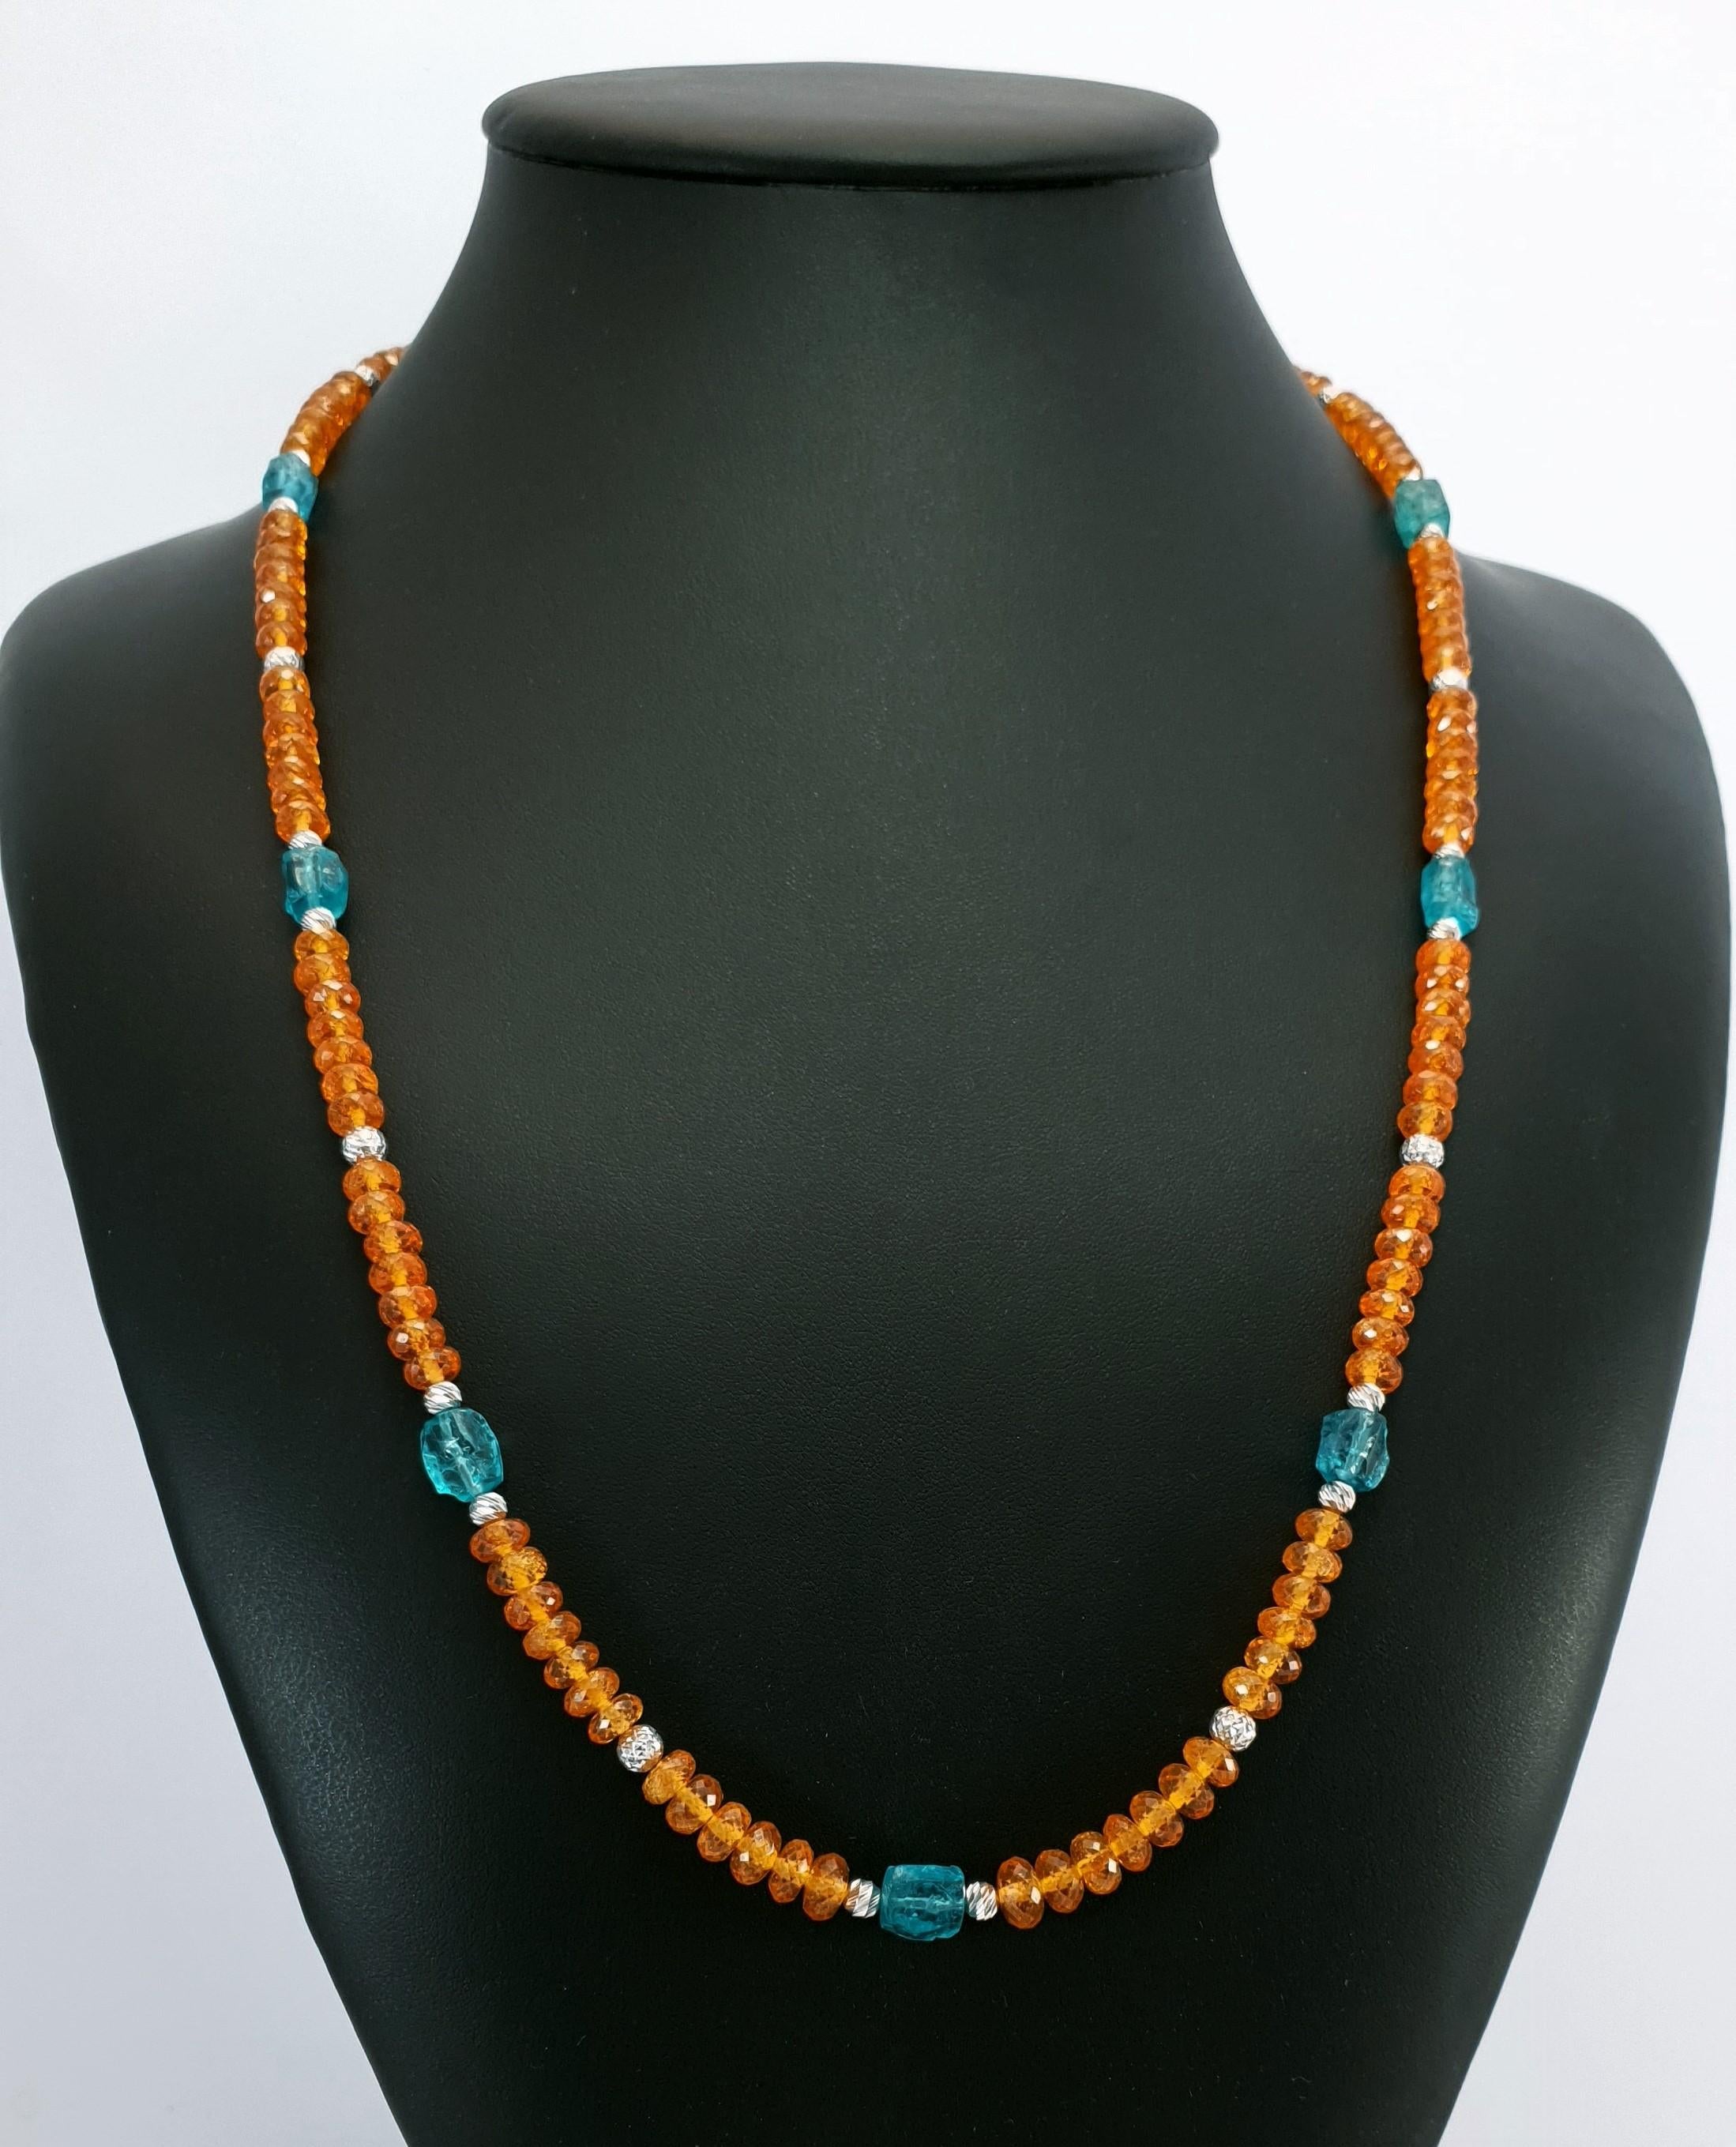 Orange Garnets and Paraiba Color Apatite Beads Necklace with 18 Carat White Gold 7